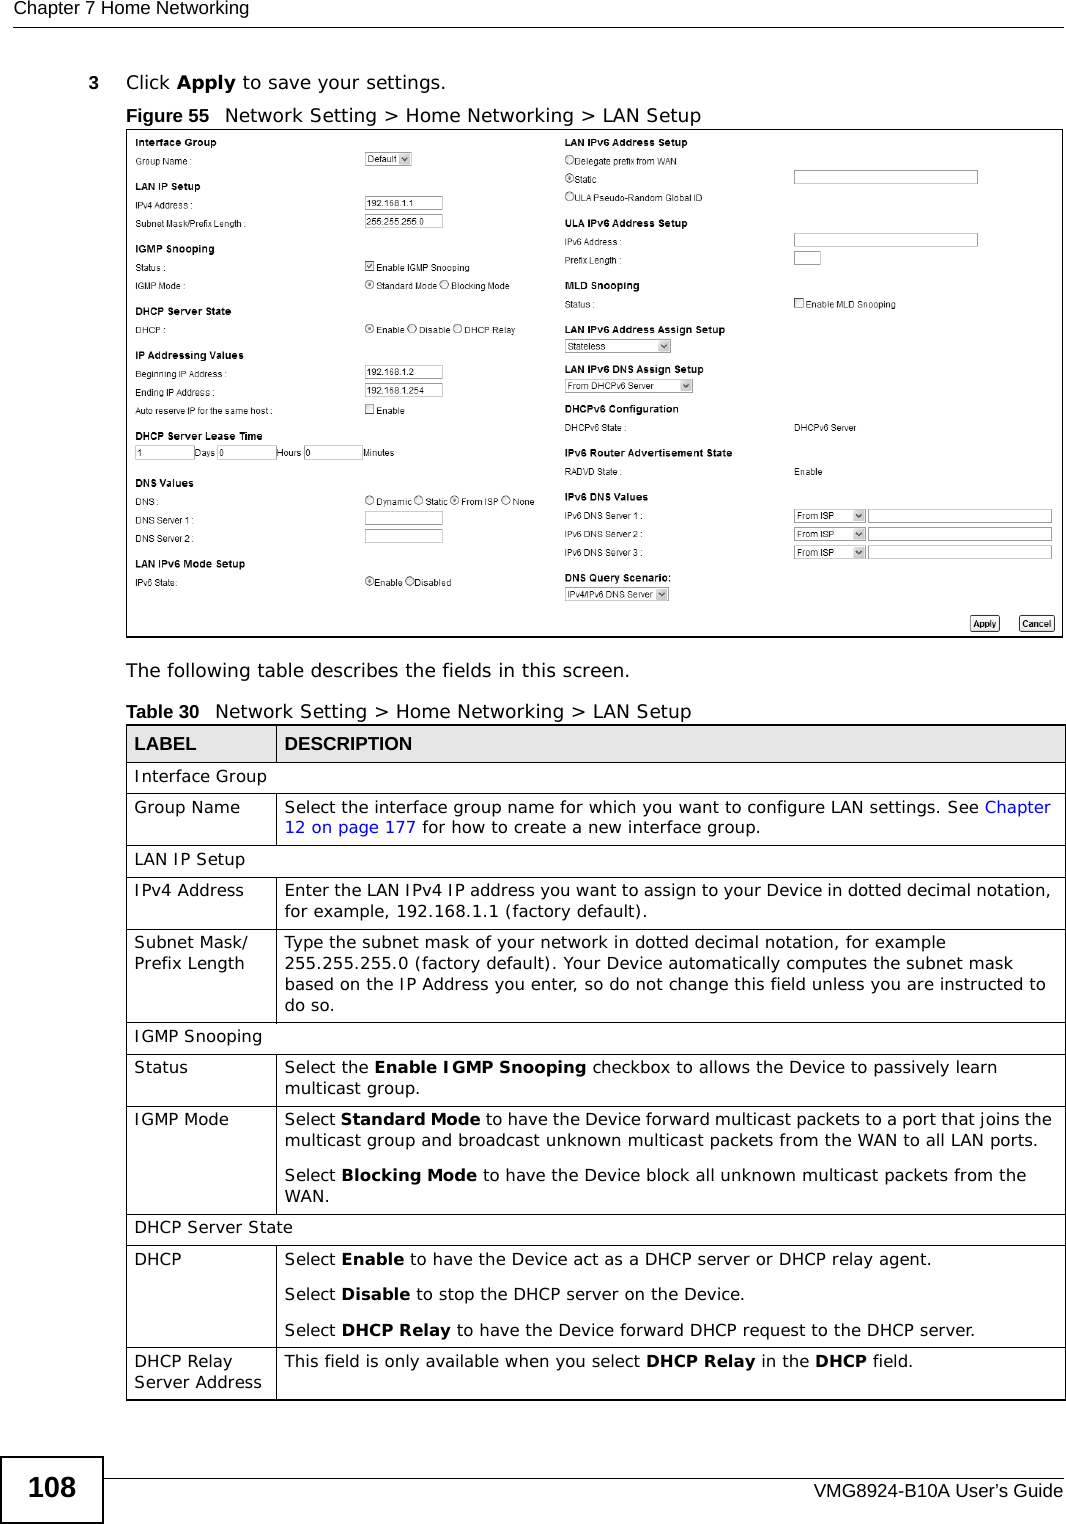 Chapter 7 Home NetworkingVMG8924-B10A User’s Guide1083Click Apply to save your settings.Figure 55   Network Setting &gt; Home Networking &gt; LAN SetupThe following table describes the fields in this screen.  Table 30   Network Setting &gt; Home Networking &gt; LAN SetupLABEL DESCRIPTIONInterface GroupGroup Name Select the interface group name for which you want to configure LAN settings. See Chapter 12 on page 177 for how to create a new interface group.LAN IP SetupIPv4 Address Enter the LAN IPv4 IP address you want to assign to your Device in dotted decimal notation, for example, 192.168.1.1 (factory default). Subnet Mask/Prefix Length  Type the subnet mask of your network in dotted decimal notation, for example 255.255.255.0 (factory default). Your Device automatically computes the subnet mask based on the IP Address you enter, so do not change this field unless you are instructed to do so.IGMP SnoopingStatus Select the Enable IGMP Snooping checkbox to allows the Device to passively learn multicast group.IGMP Mode Select Standard Mode to have the Device forward multicast packets to a port that joins the multicast group and broadcast unknown multicast packets from the WAN to all LAN ports.Select Blocking Mode to have the Device block all unknown multicast packets from the WAN.DHCP Server StateDHCP Select Enable to have the Device act as a DHCP server or DHCP relay agent. Select Disable to stop the DHCP server on the Device. Select DHCP Relay to have the Device forward DHCP request to the DHCP server. DHCP Relay Server Address This field is only available when you select DHCP Relay in the DHCP field. 